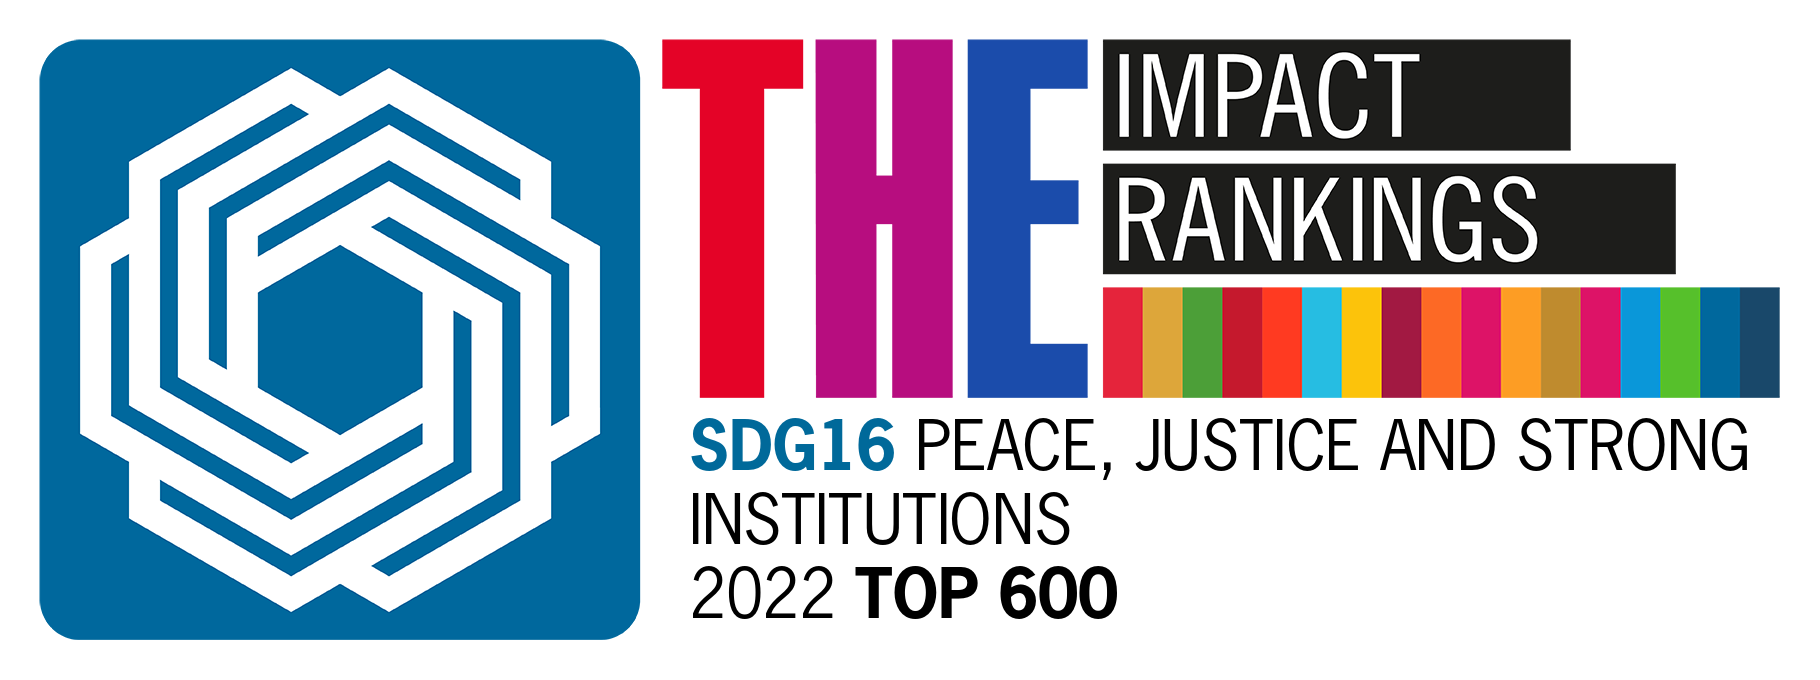 SDG16_ Peace, Justice and Strong Institutions - Top 600